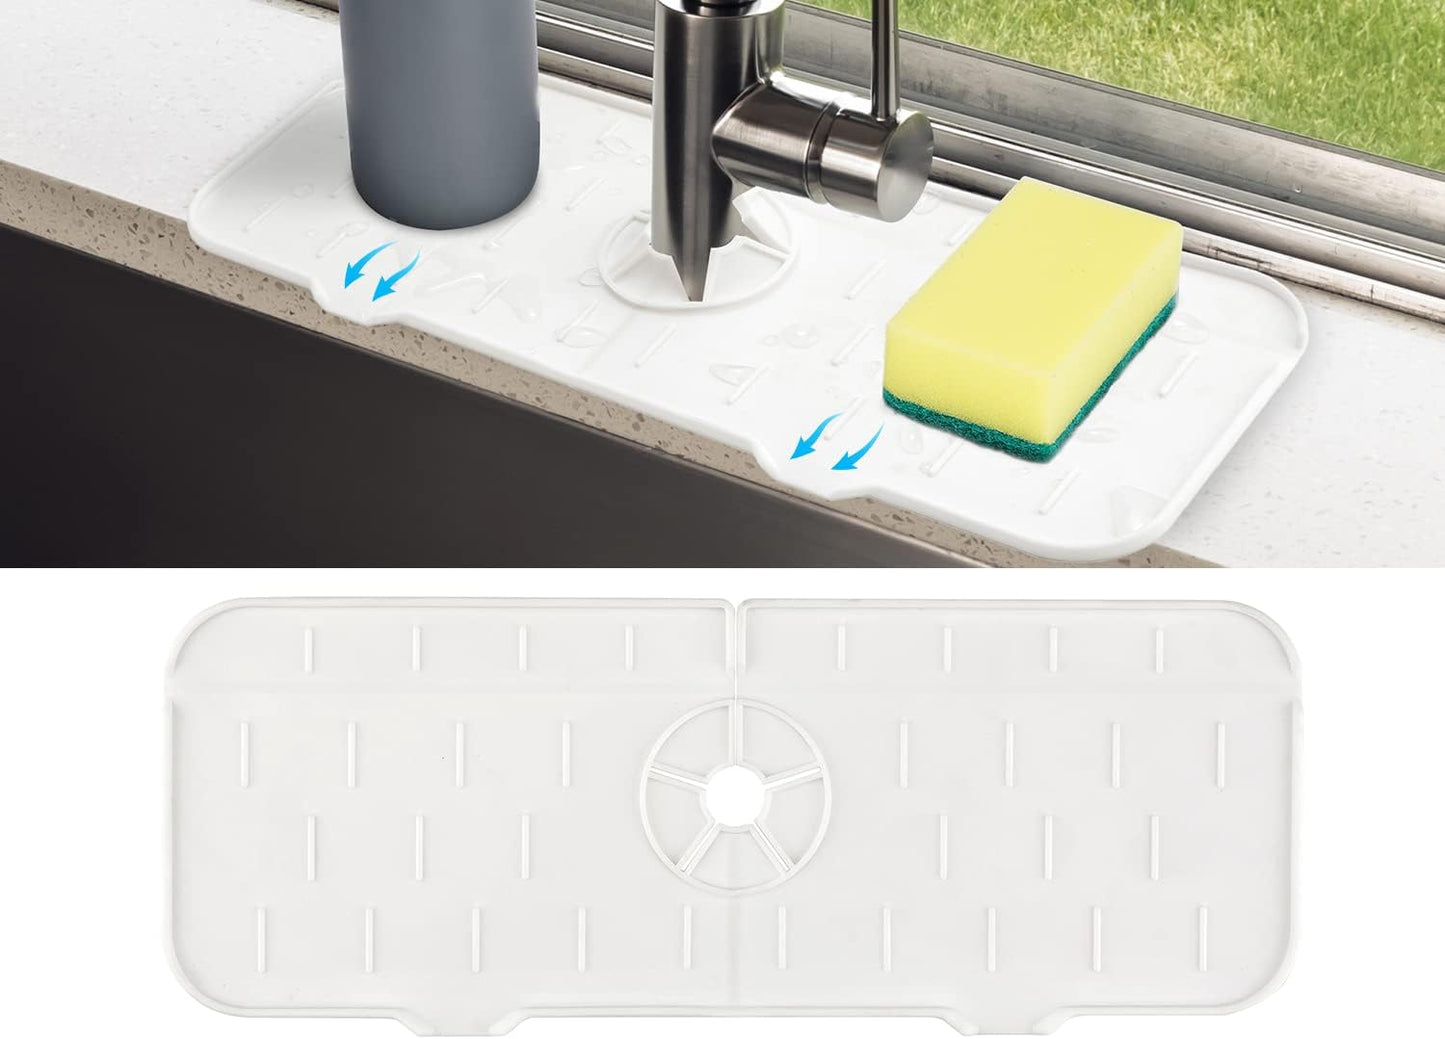 SXhyf Silicone Faucet Handle Drip Catcher Mat